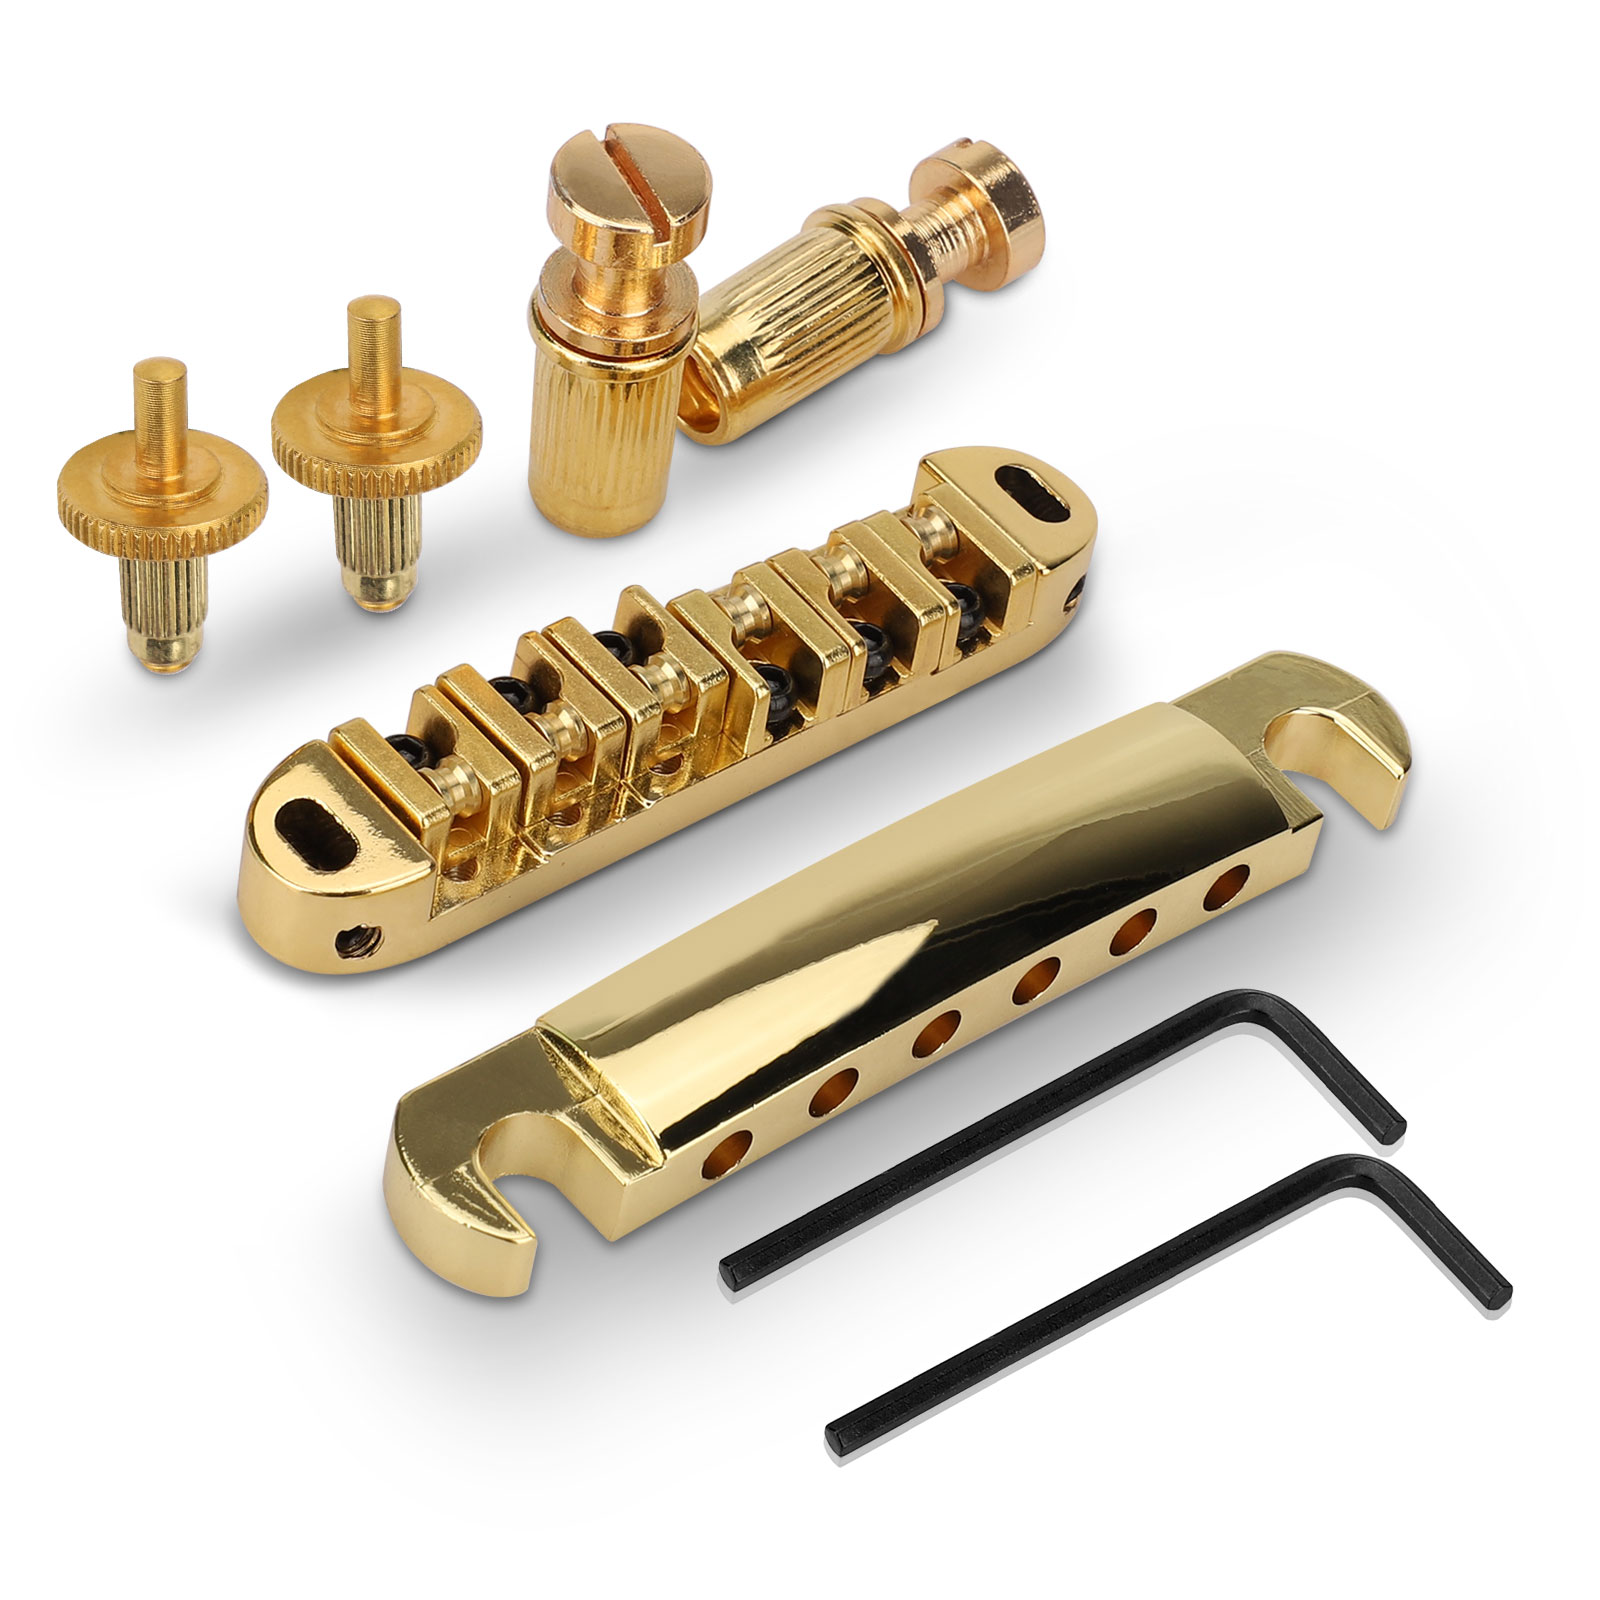 Brass Roller Saddle TOM Bridge & Tail-piece with Large Metic Studs Posts for Les Paul Style Electric Guitars Lion Pattern Chrome LAMSAM ABR-1 Style Tune-o-matic Bridge Stop Tailpiece Combos 